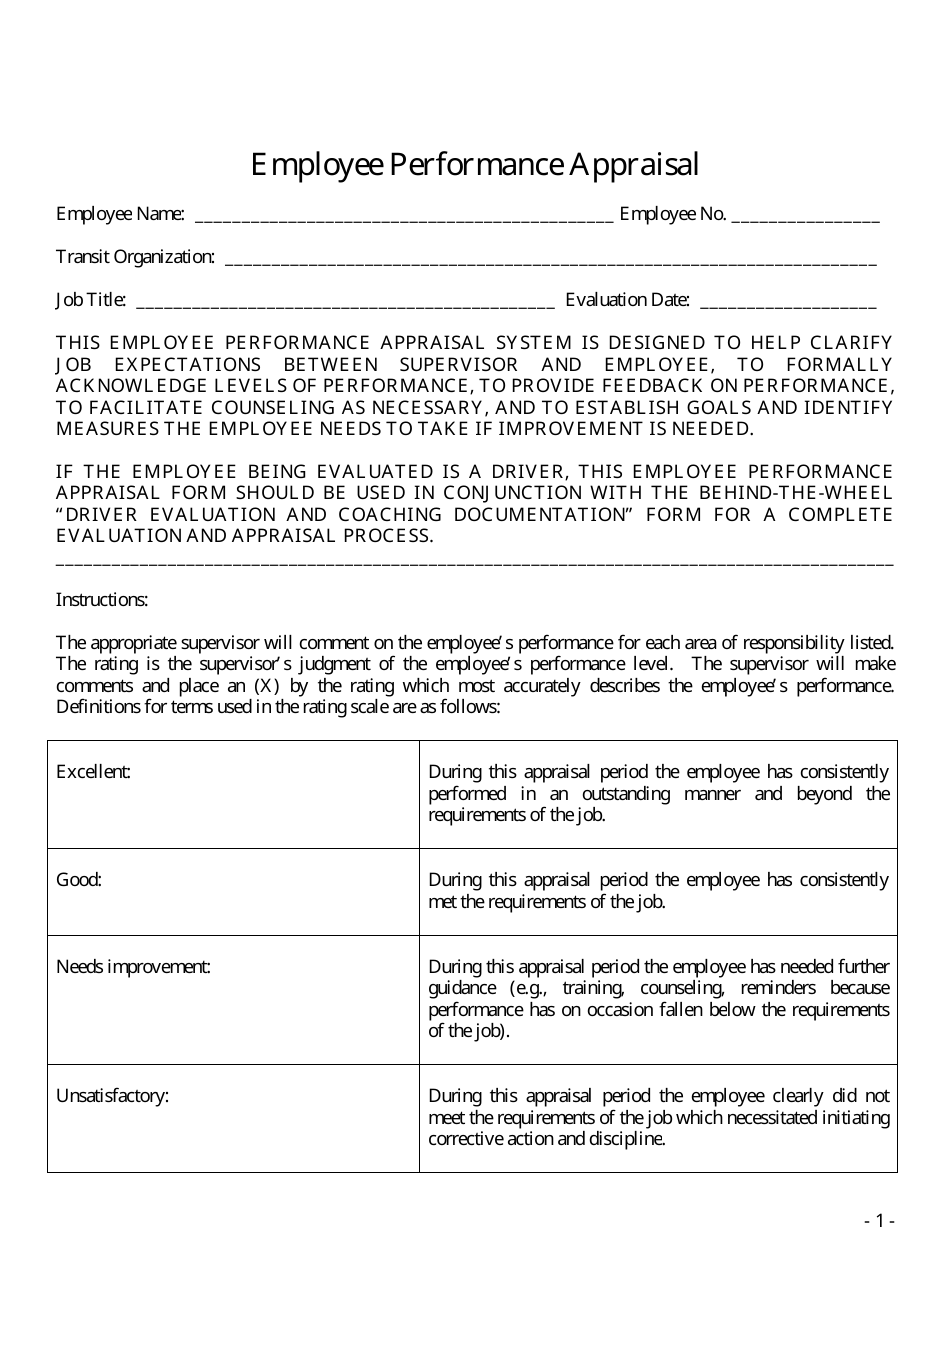 Employee Performance Appraisal Form, Page 1